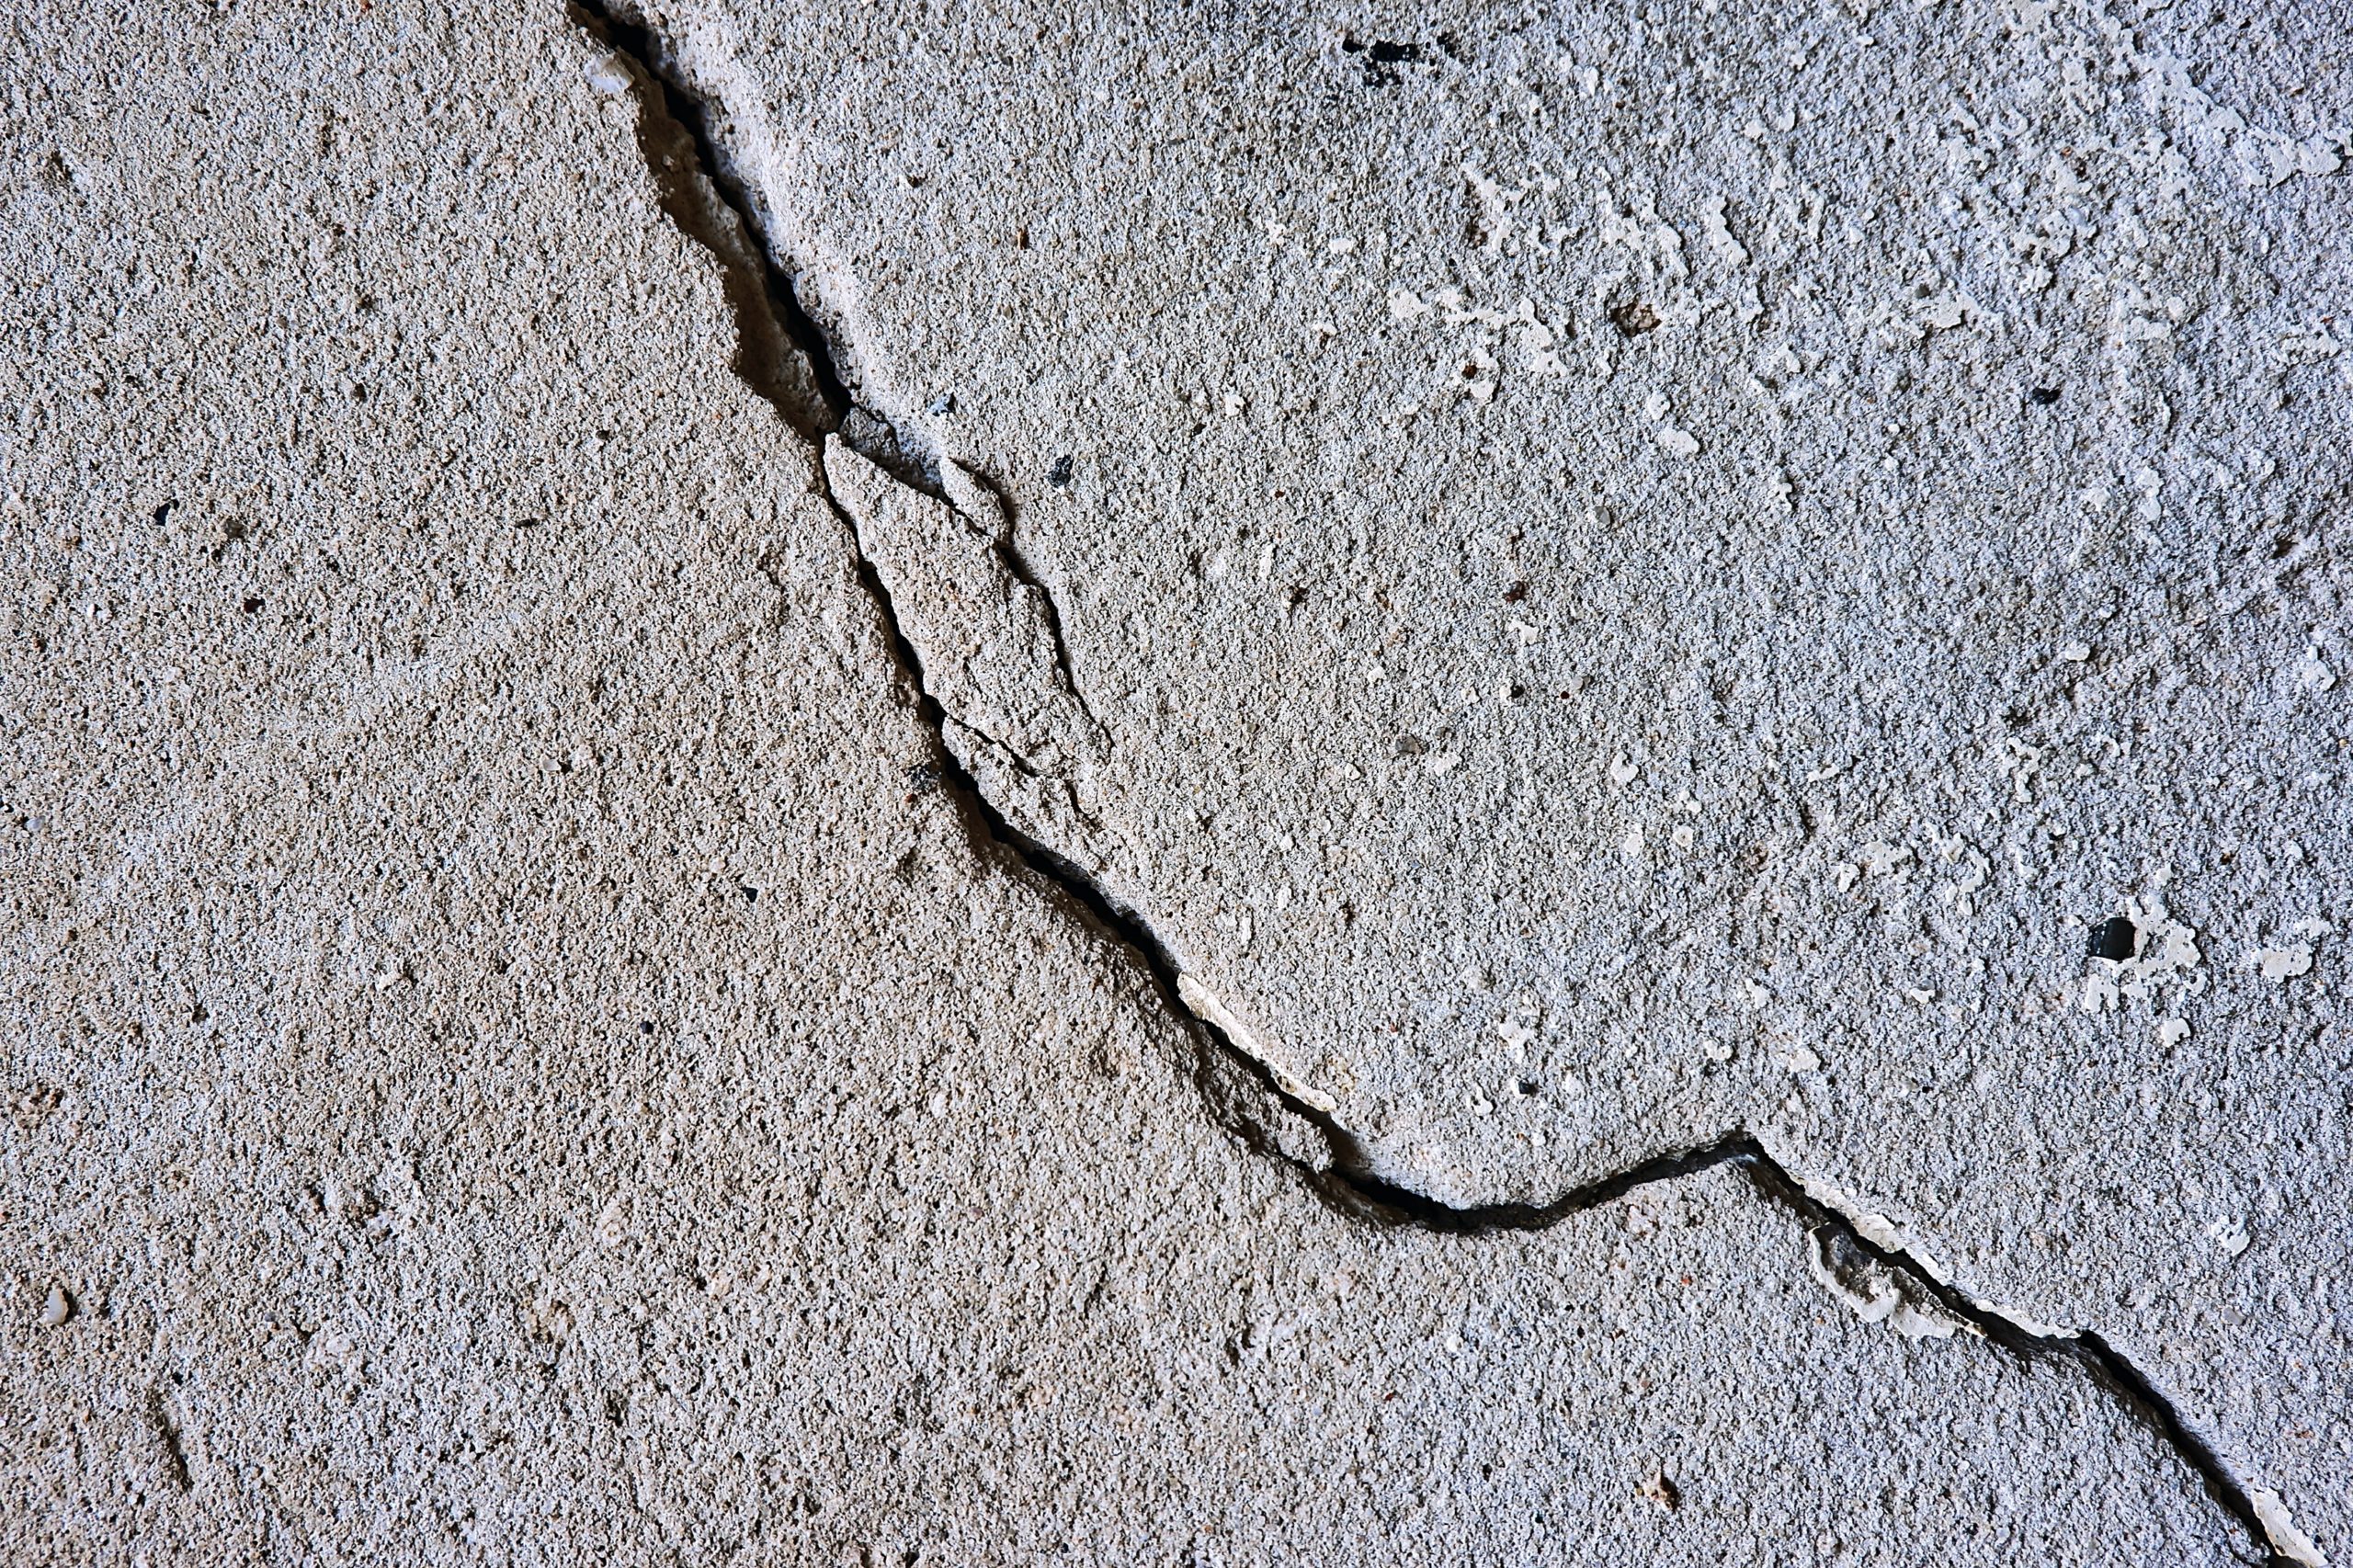 Cracks in the foundation